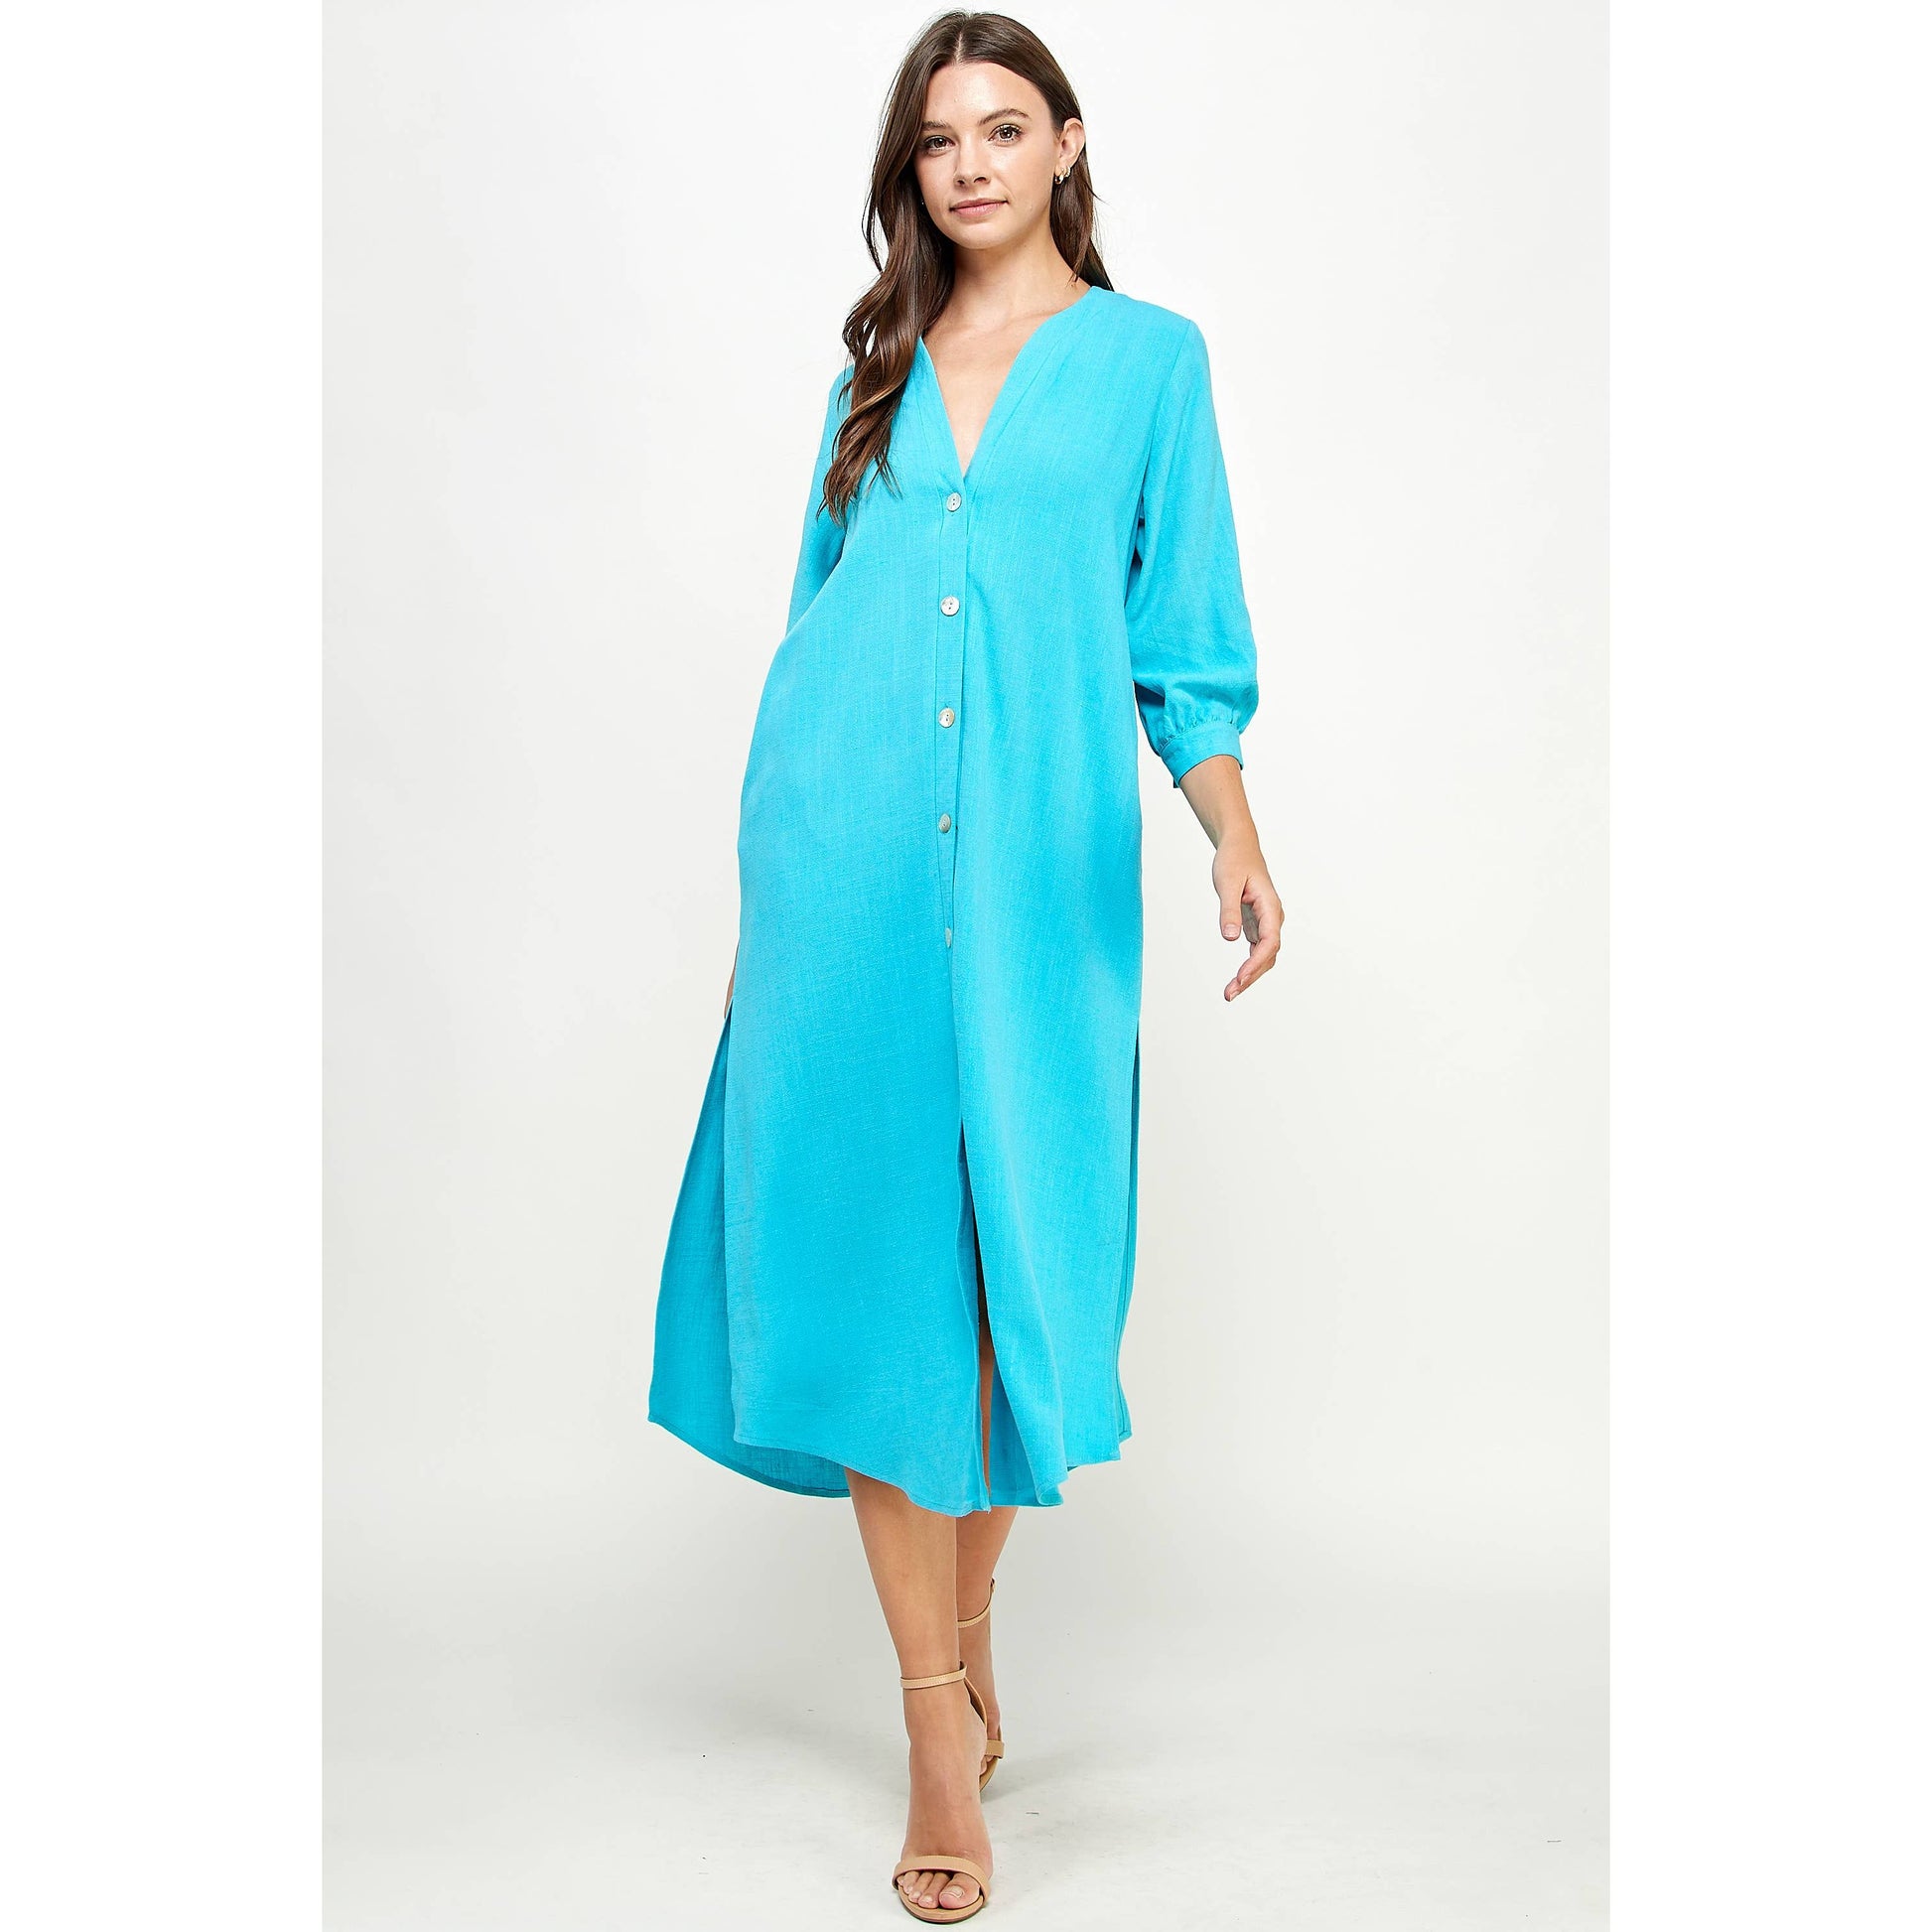 Blue V-Neck Button Down Linen Dress by Ellison Apparel. Available in sizes Small through Large. 70% Viscose, 30% Linen.